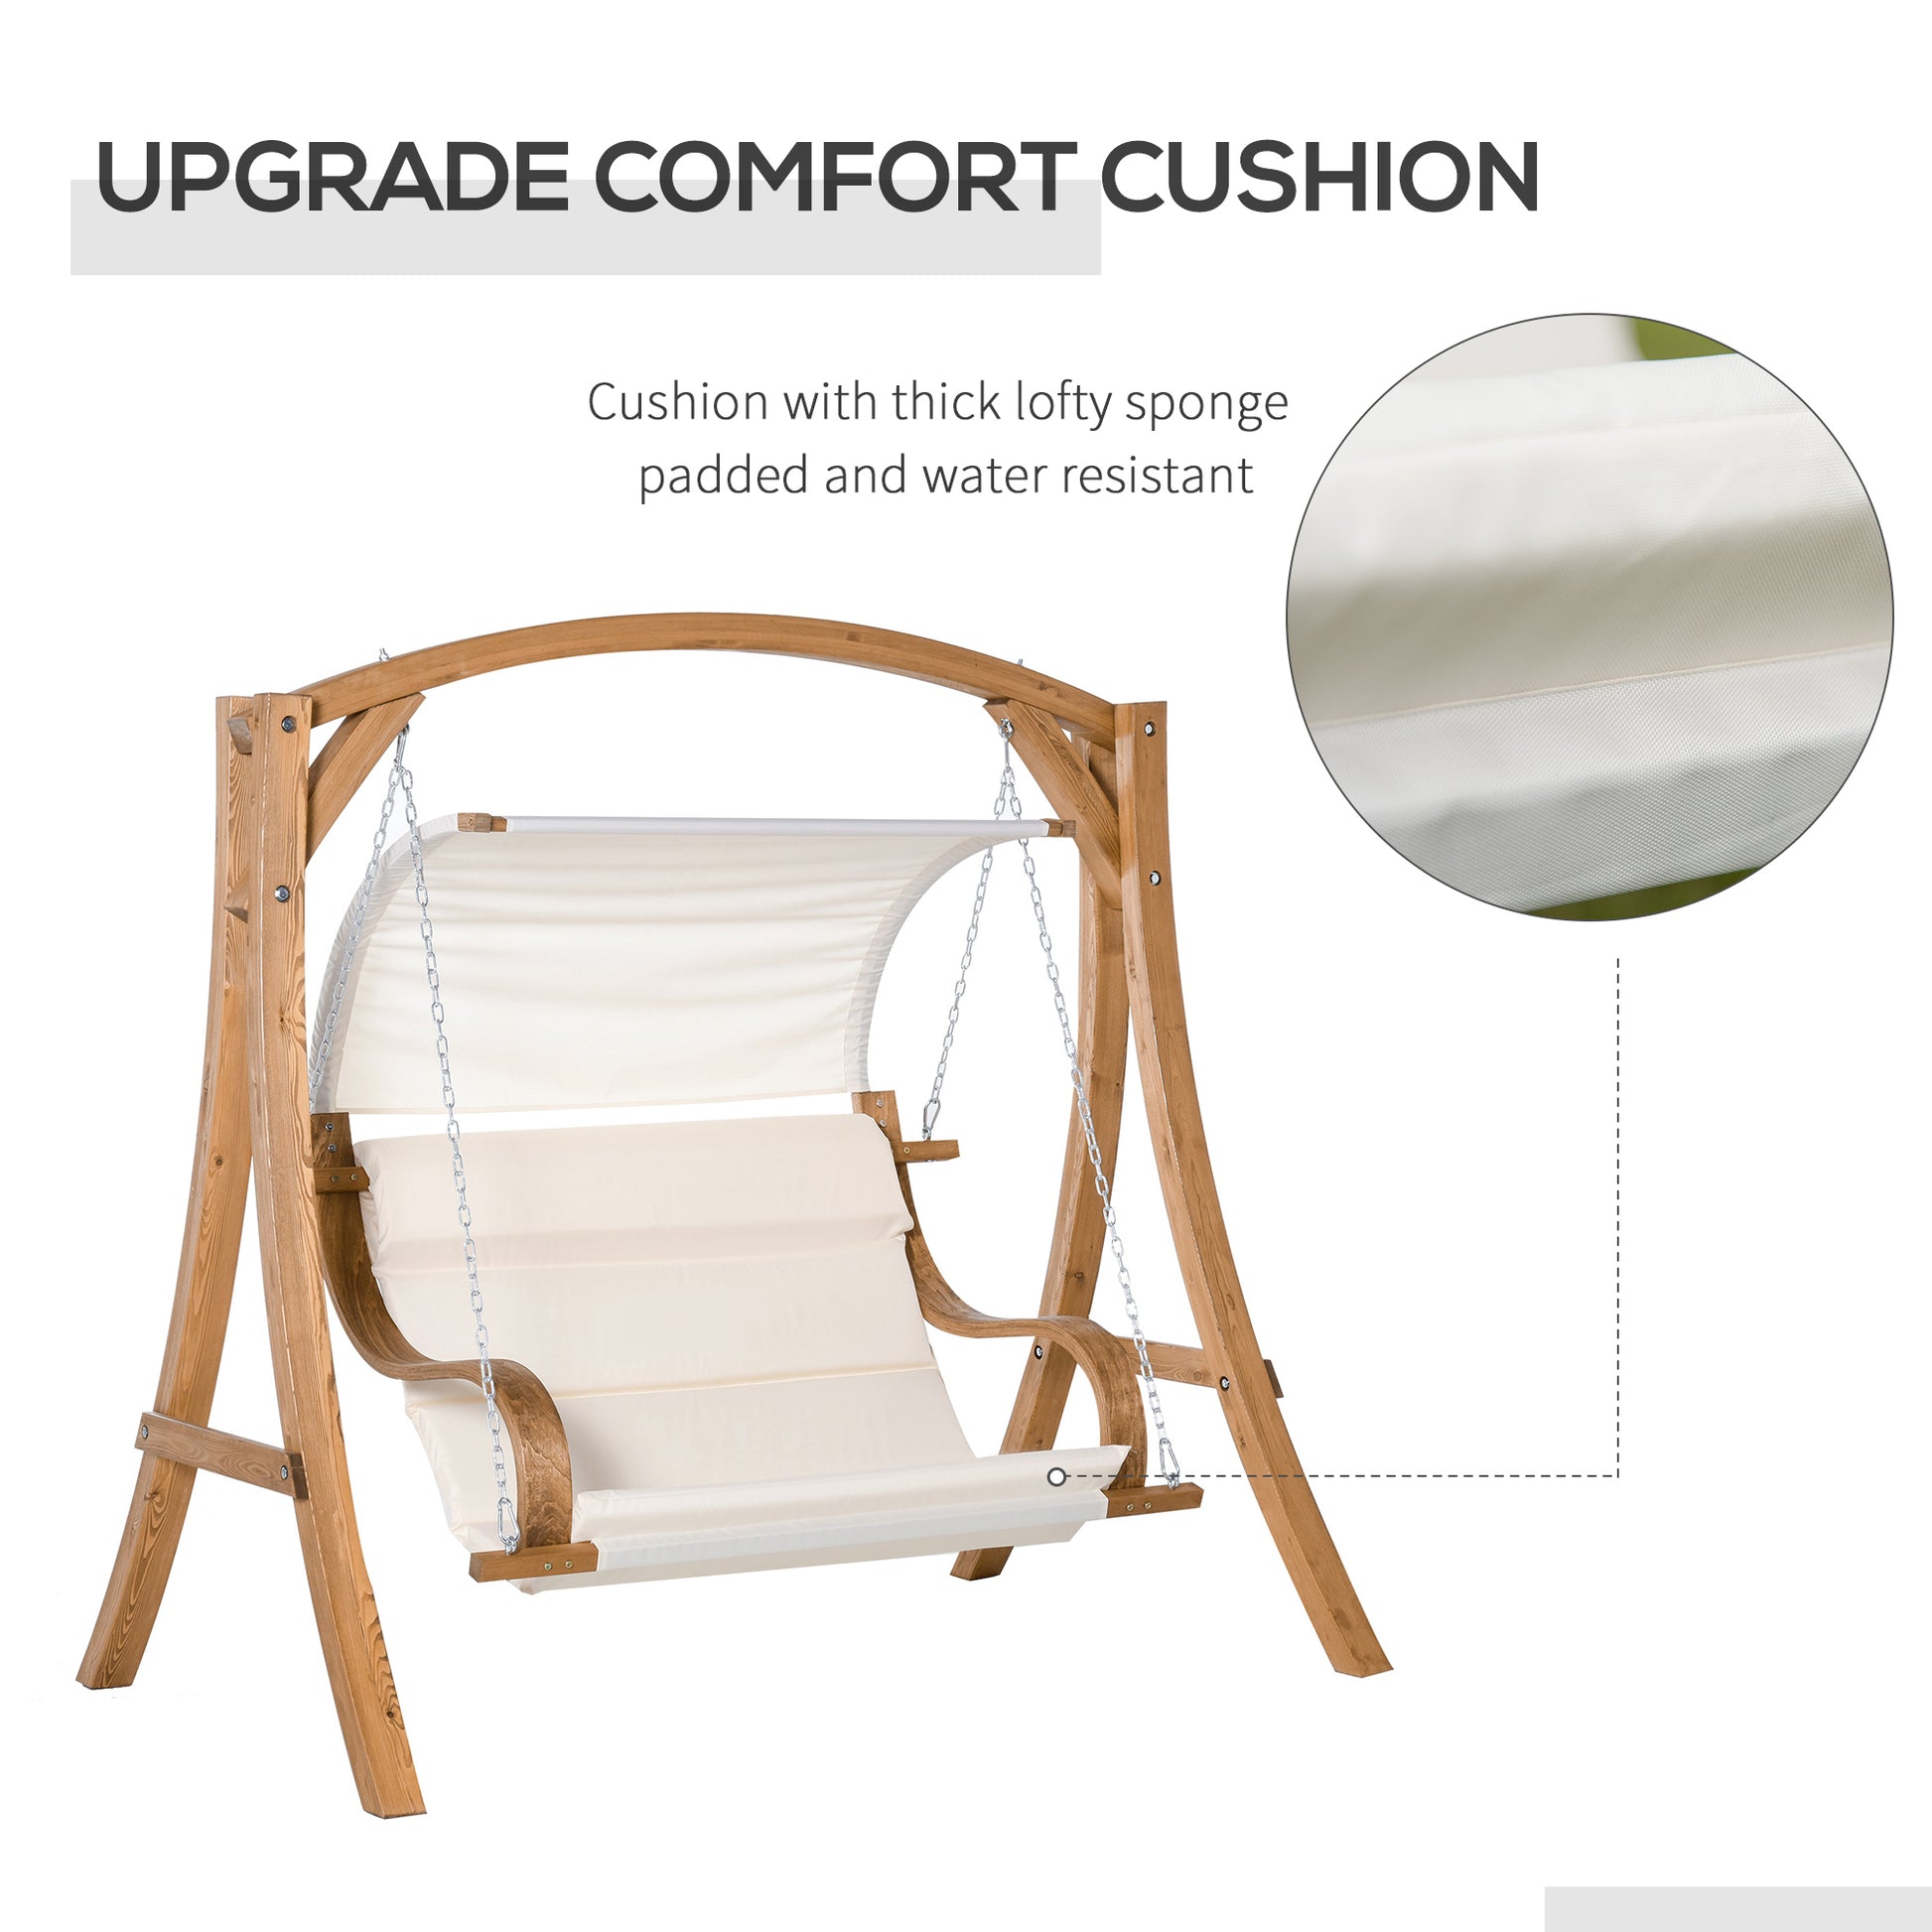 Wooden Porch Swing Chair A-Frame Wood Log Swing Bench Chair With Canopy and Cushion for Patio Garden Yard - Gallery Canada